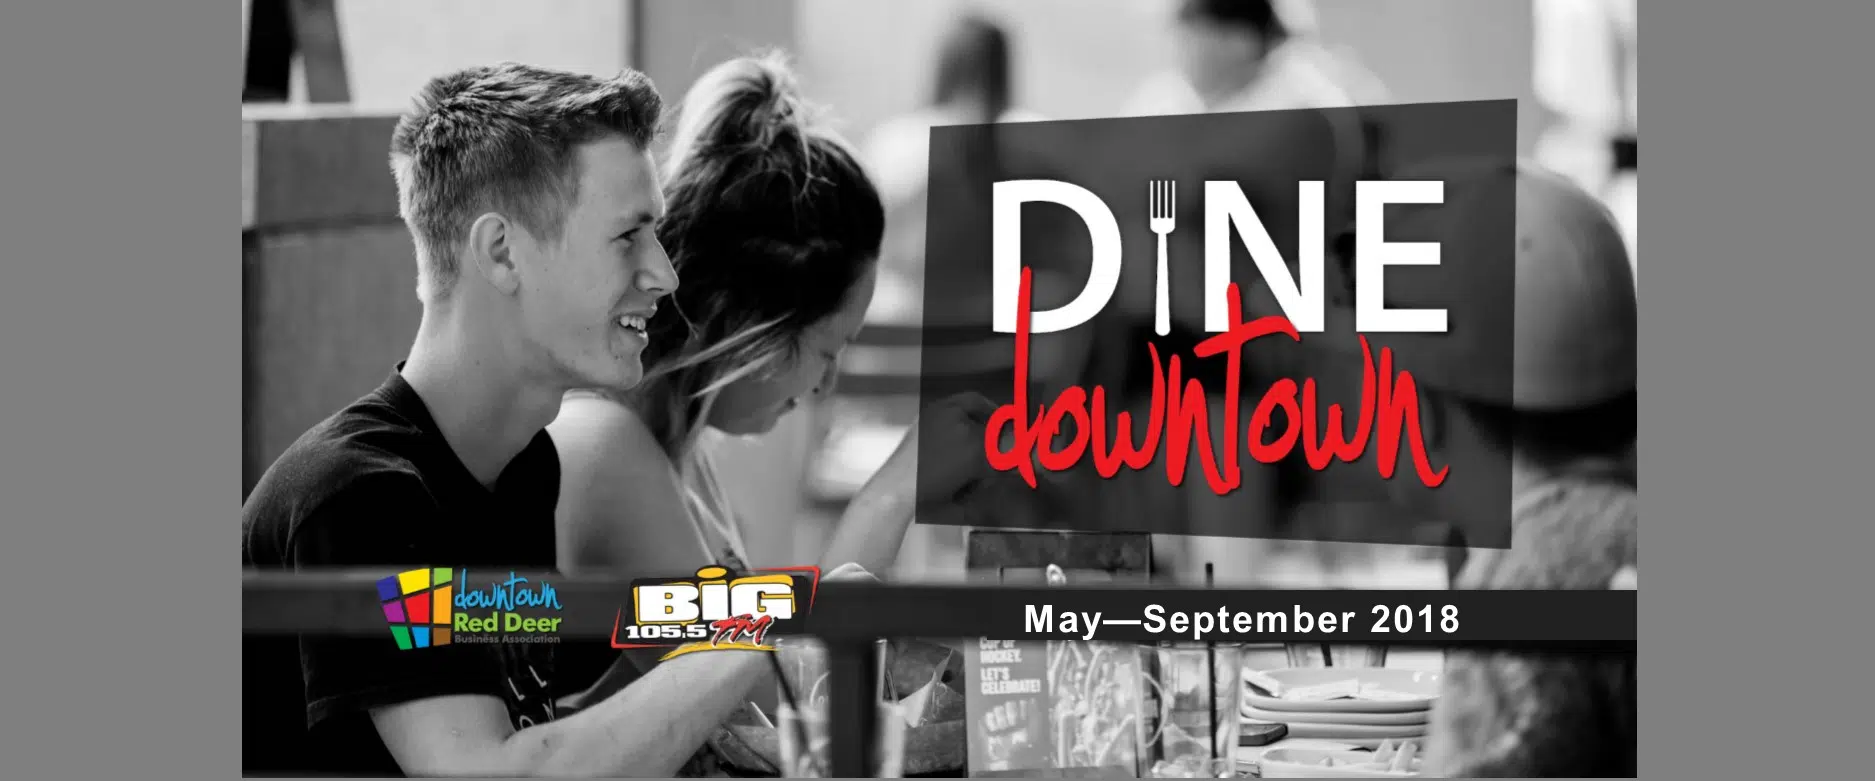 Dine Downtown 2018